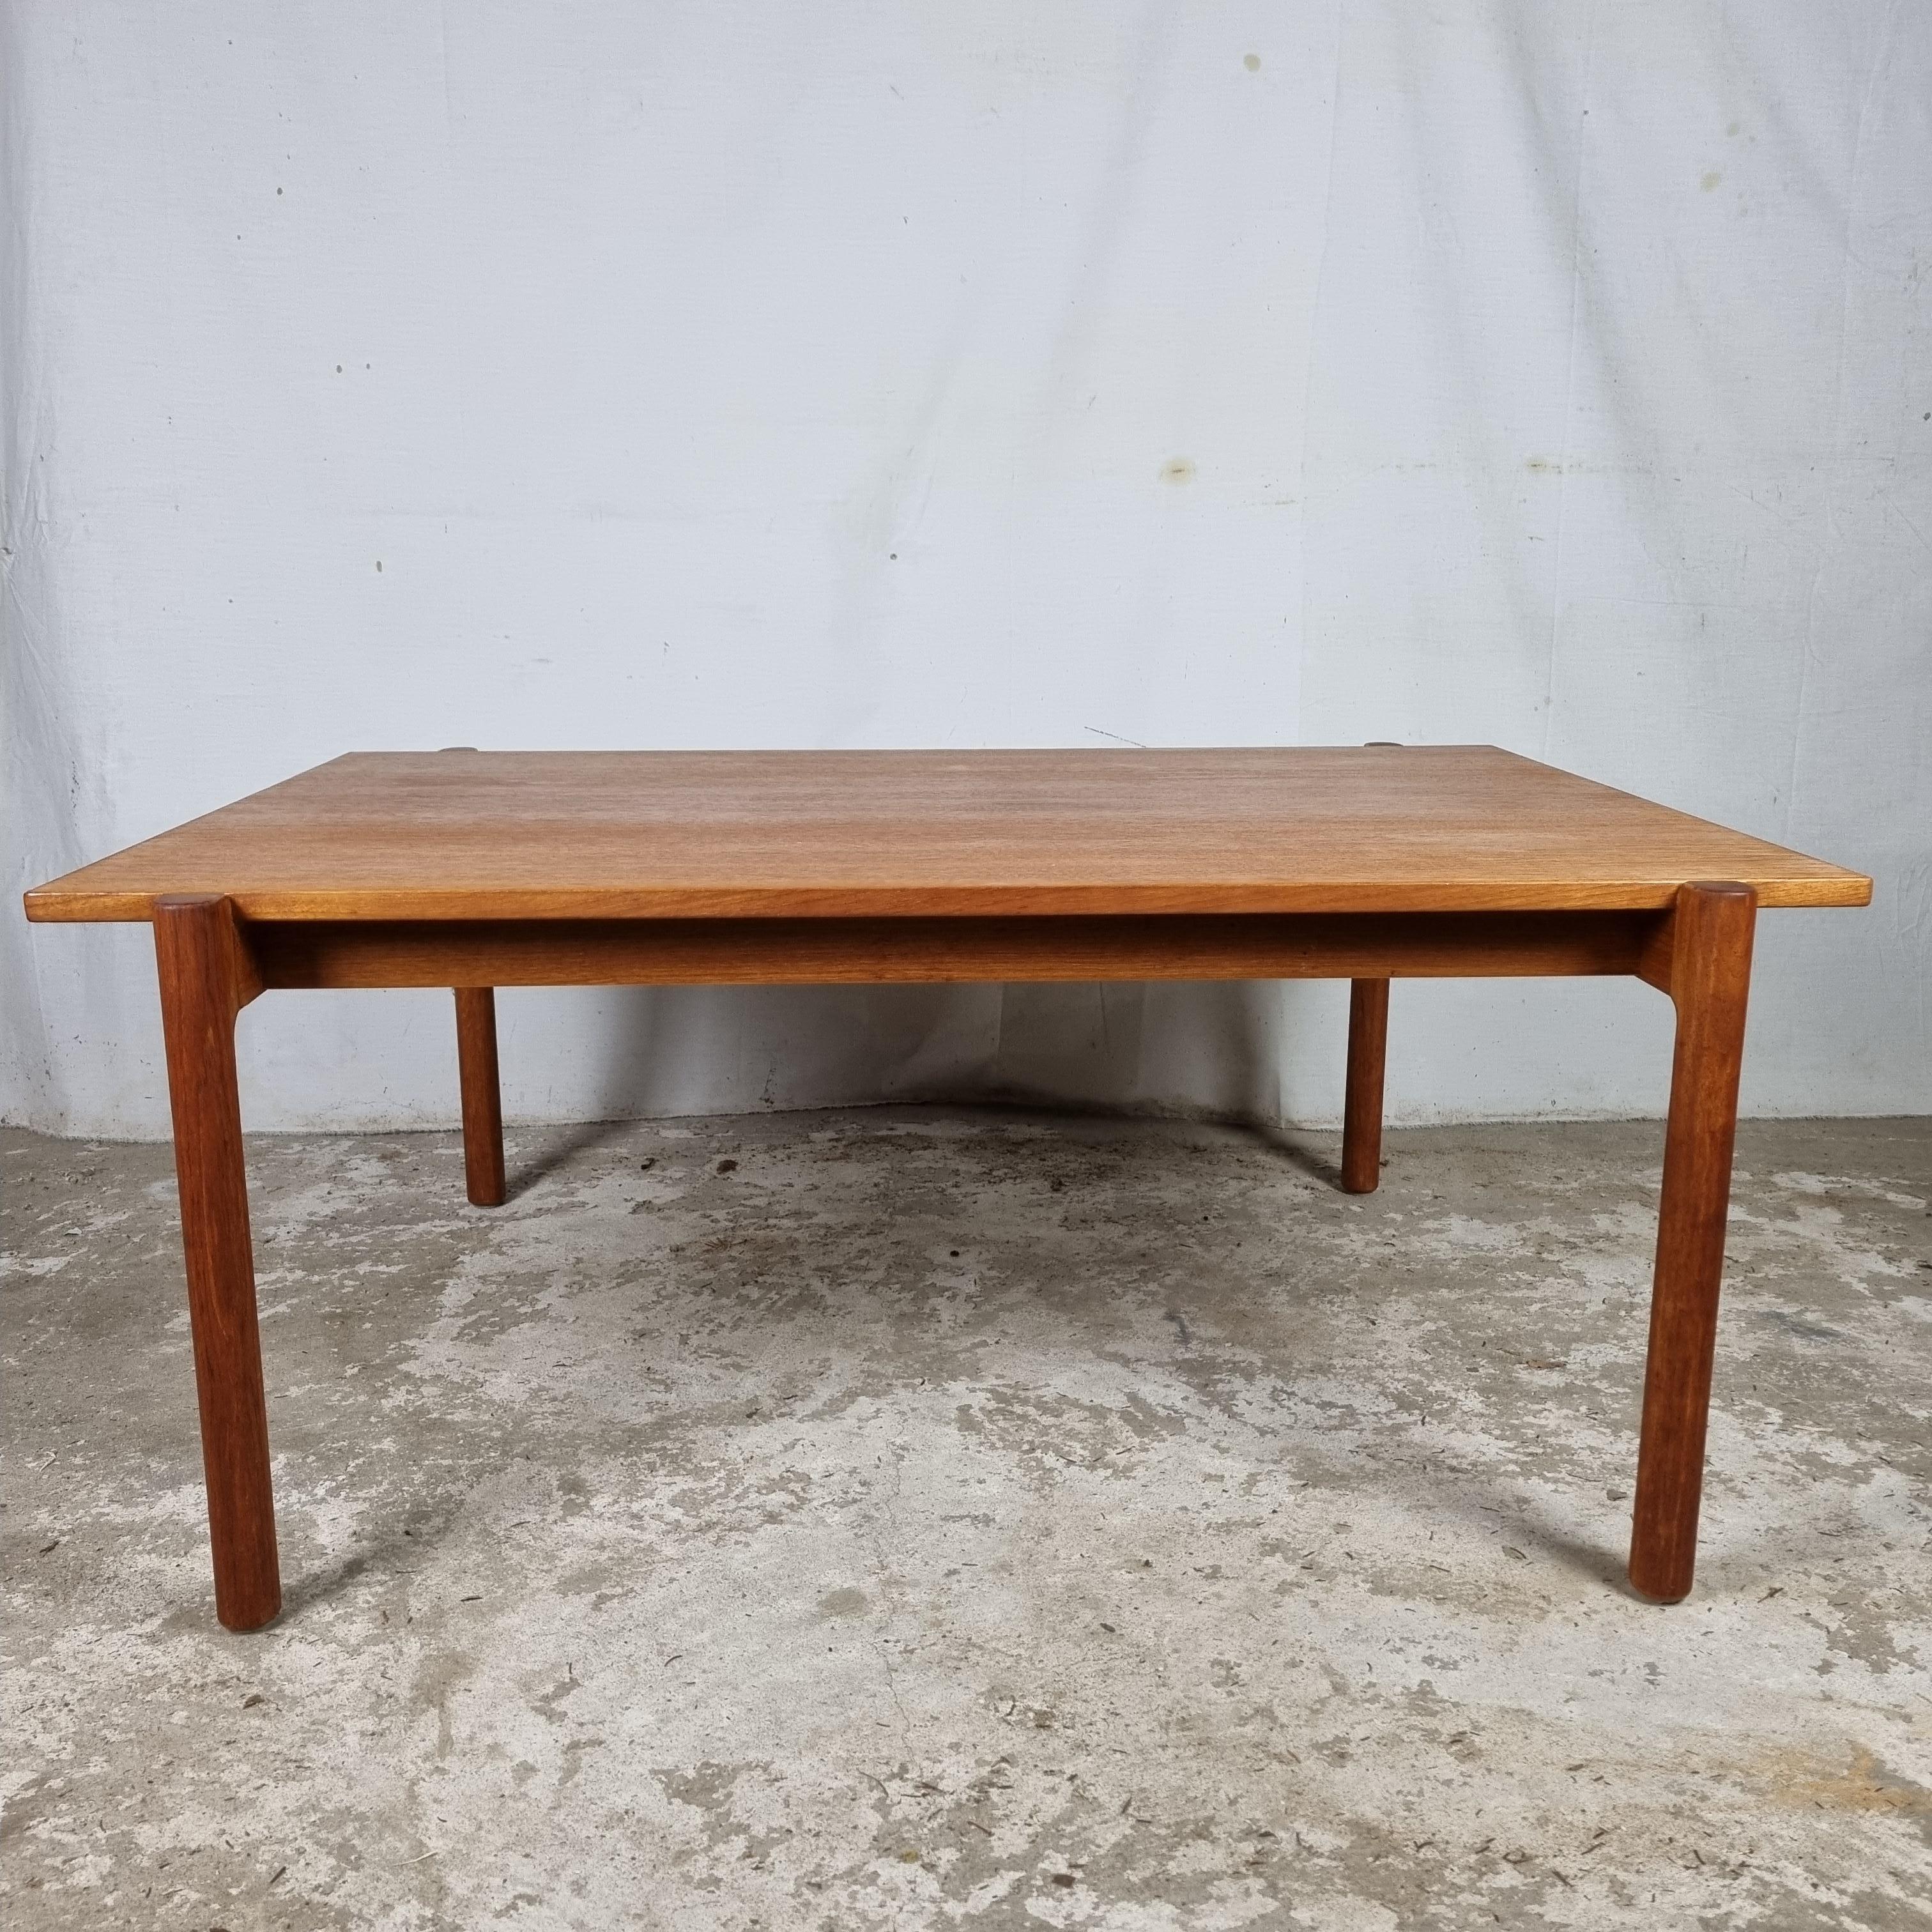 Original vintage Scandinavian teak coffee table from the 1960s. Designed by Kurt Østervig for Slagelse Møbelværk (Danish premium brand).

The table is still in very good condition. Light traces of use, appropriate for the age.

Size:
Length